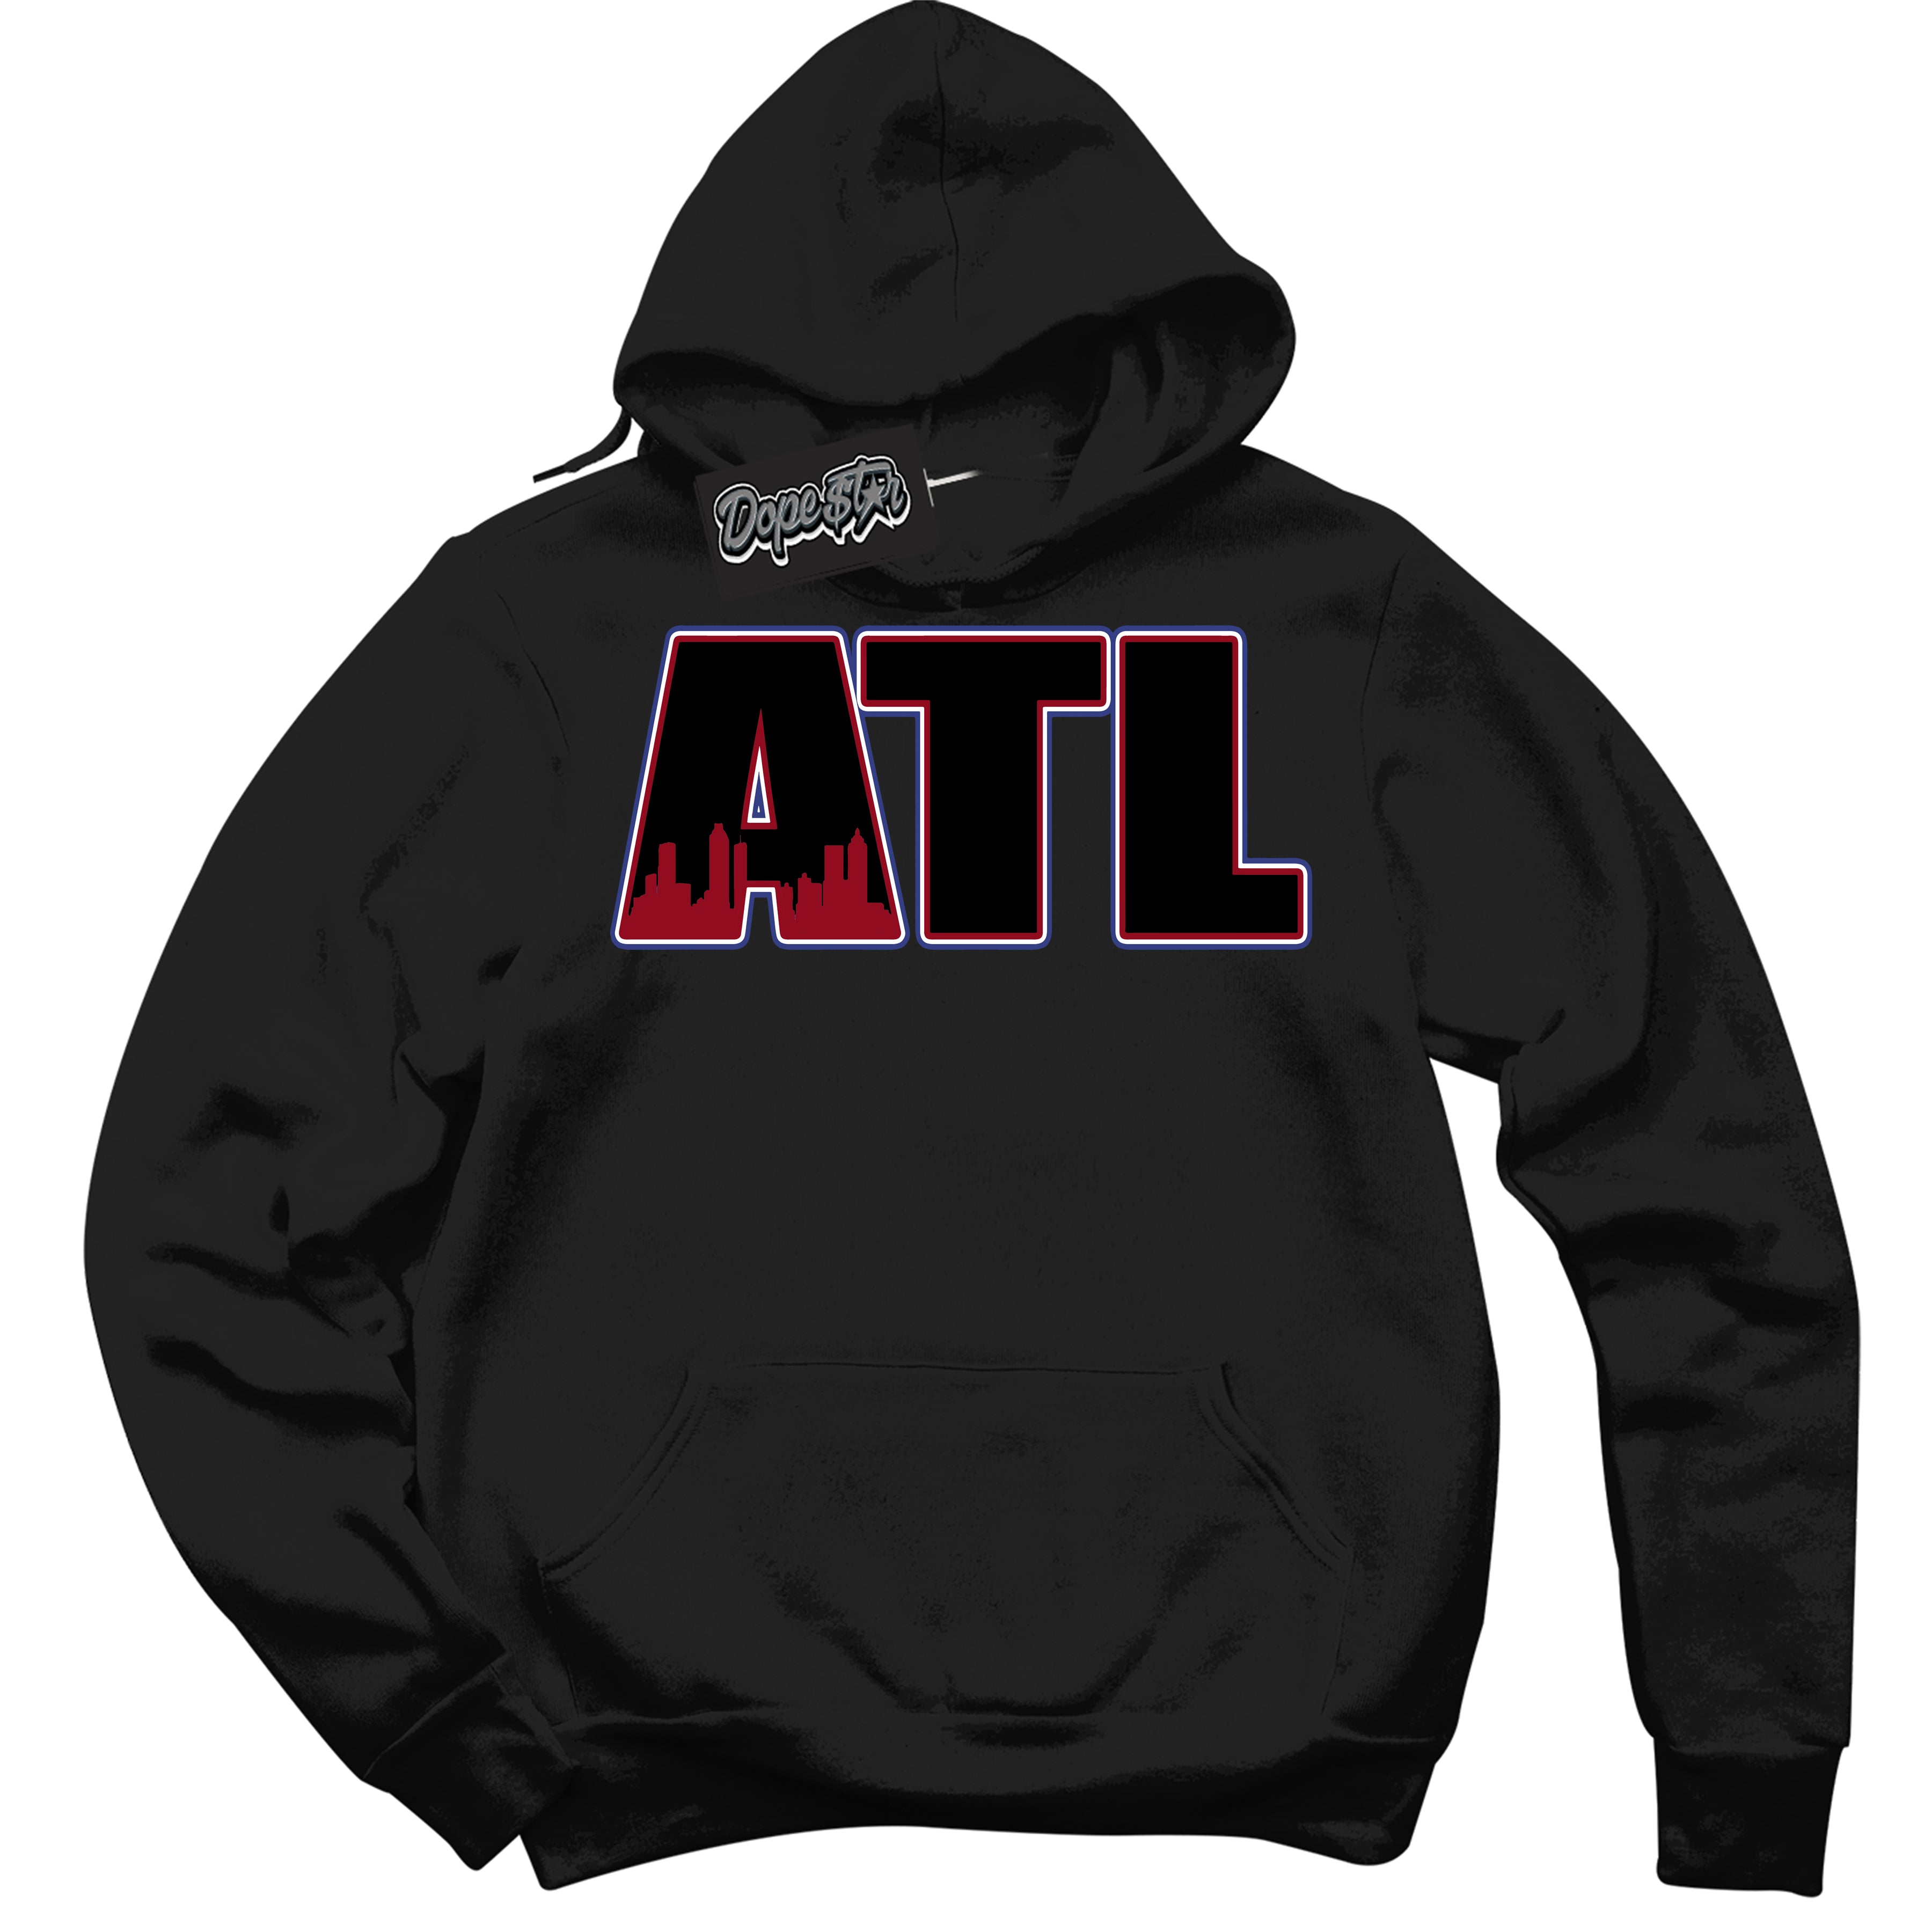 Cool Black Hoodie with “ Atlanta ”  design that Perfectly Matches Playoffs 8s Sneakers.